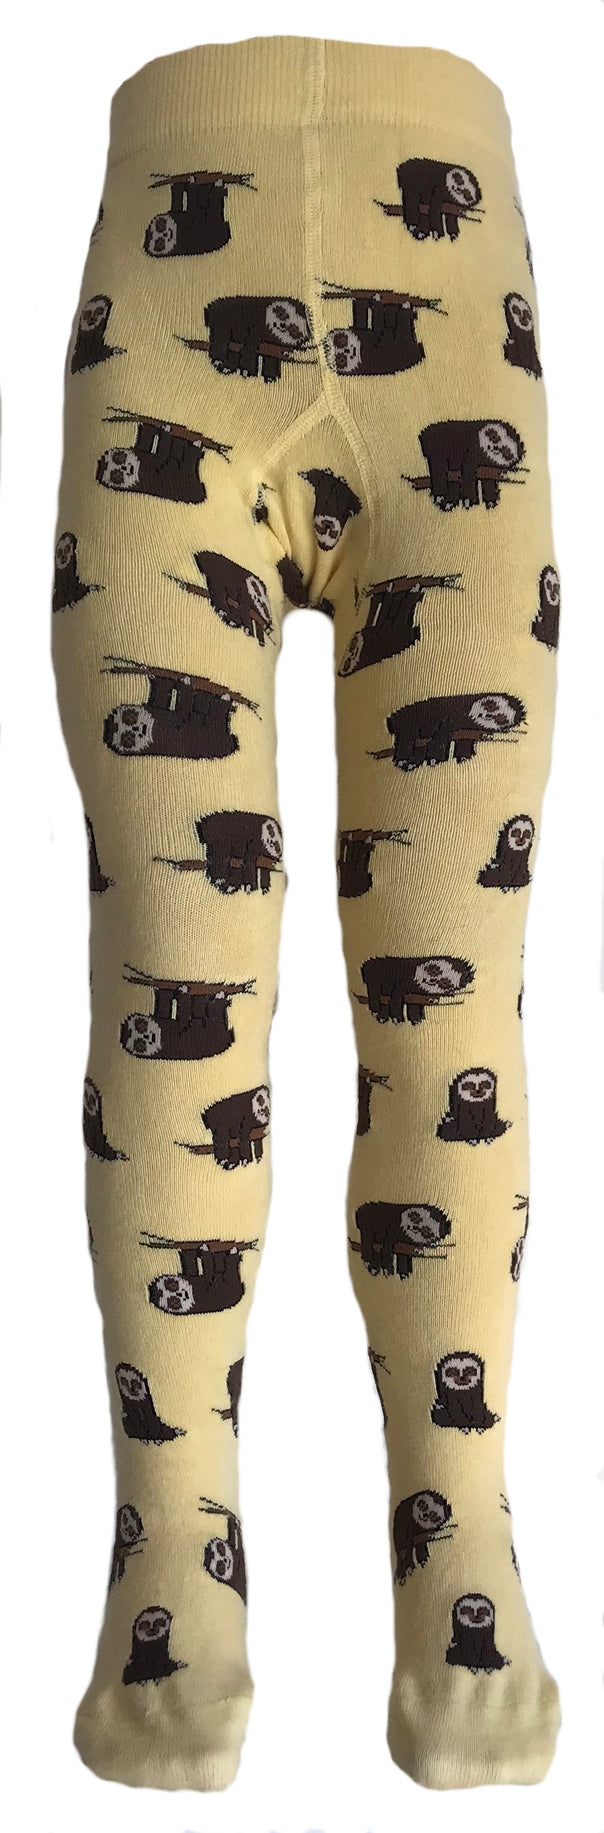 S & S Tights - Sloths